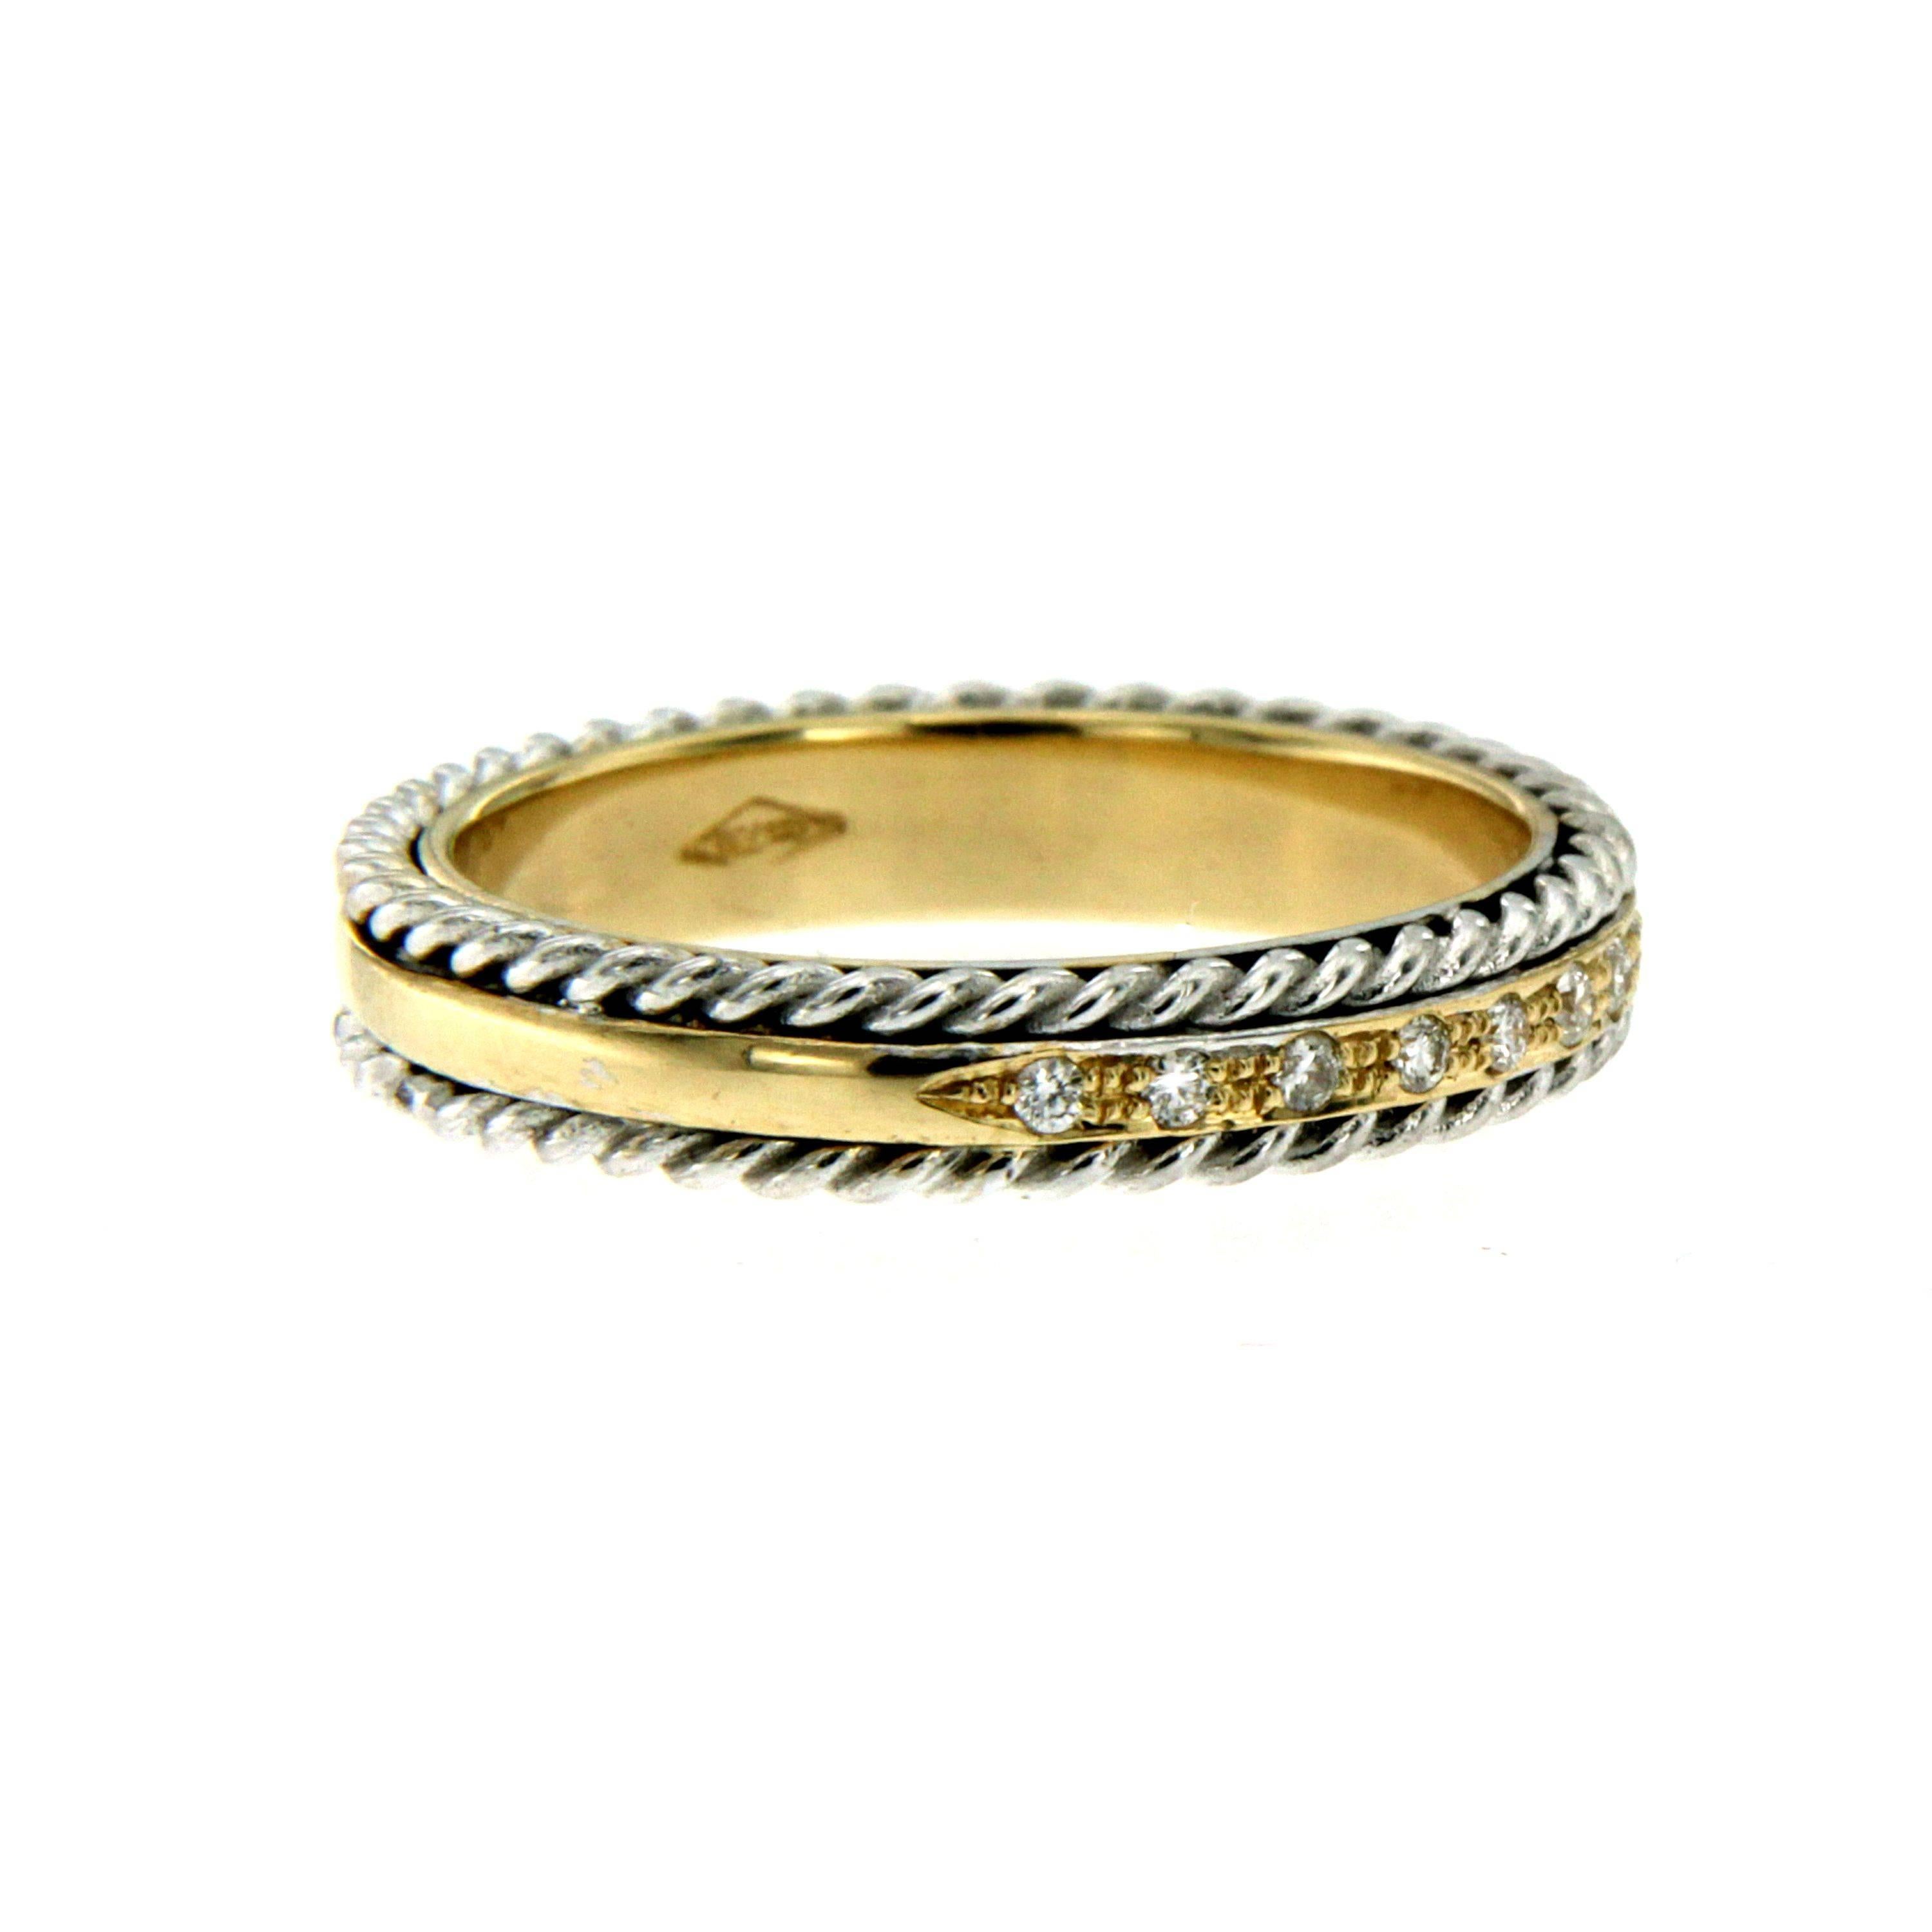 An extraordinary collection for both men and women, Classic and elegant wedding band ring. Textured edges add a modern touch to this design.

It is set with 0.10 cts of Diamonds graded G color Vvs1 

CONDITION: Brand New 
METAL: 18k yellow and white